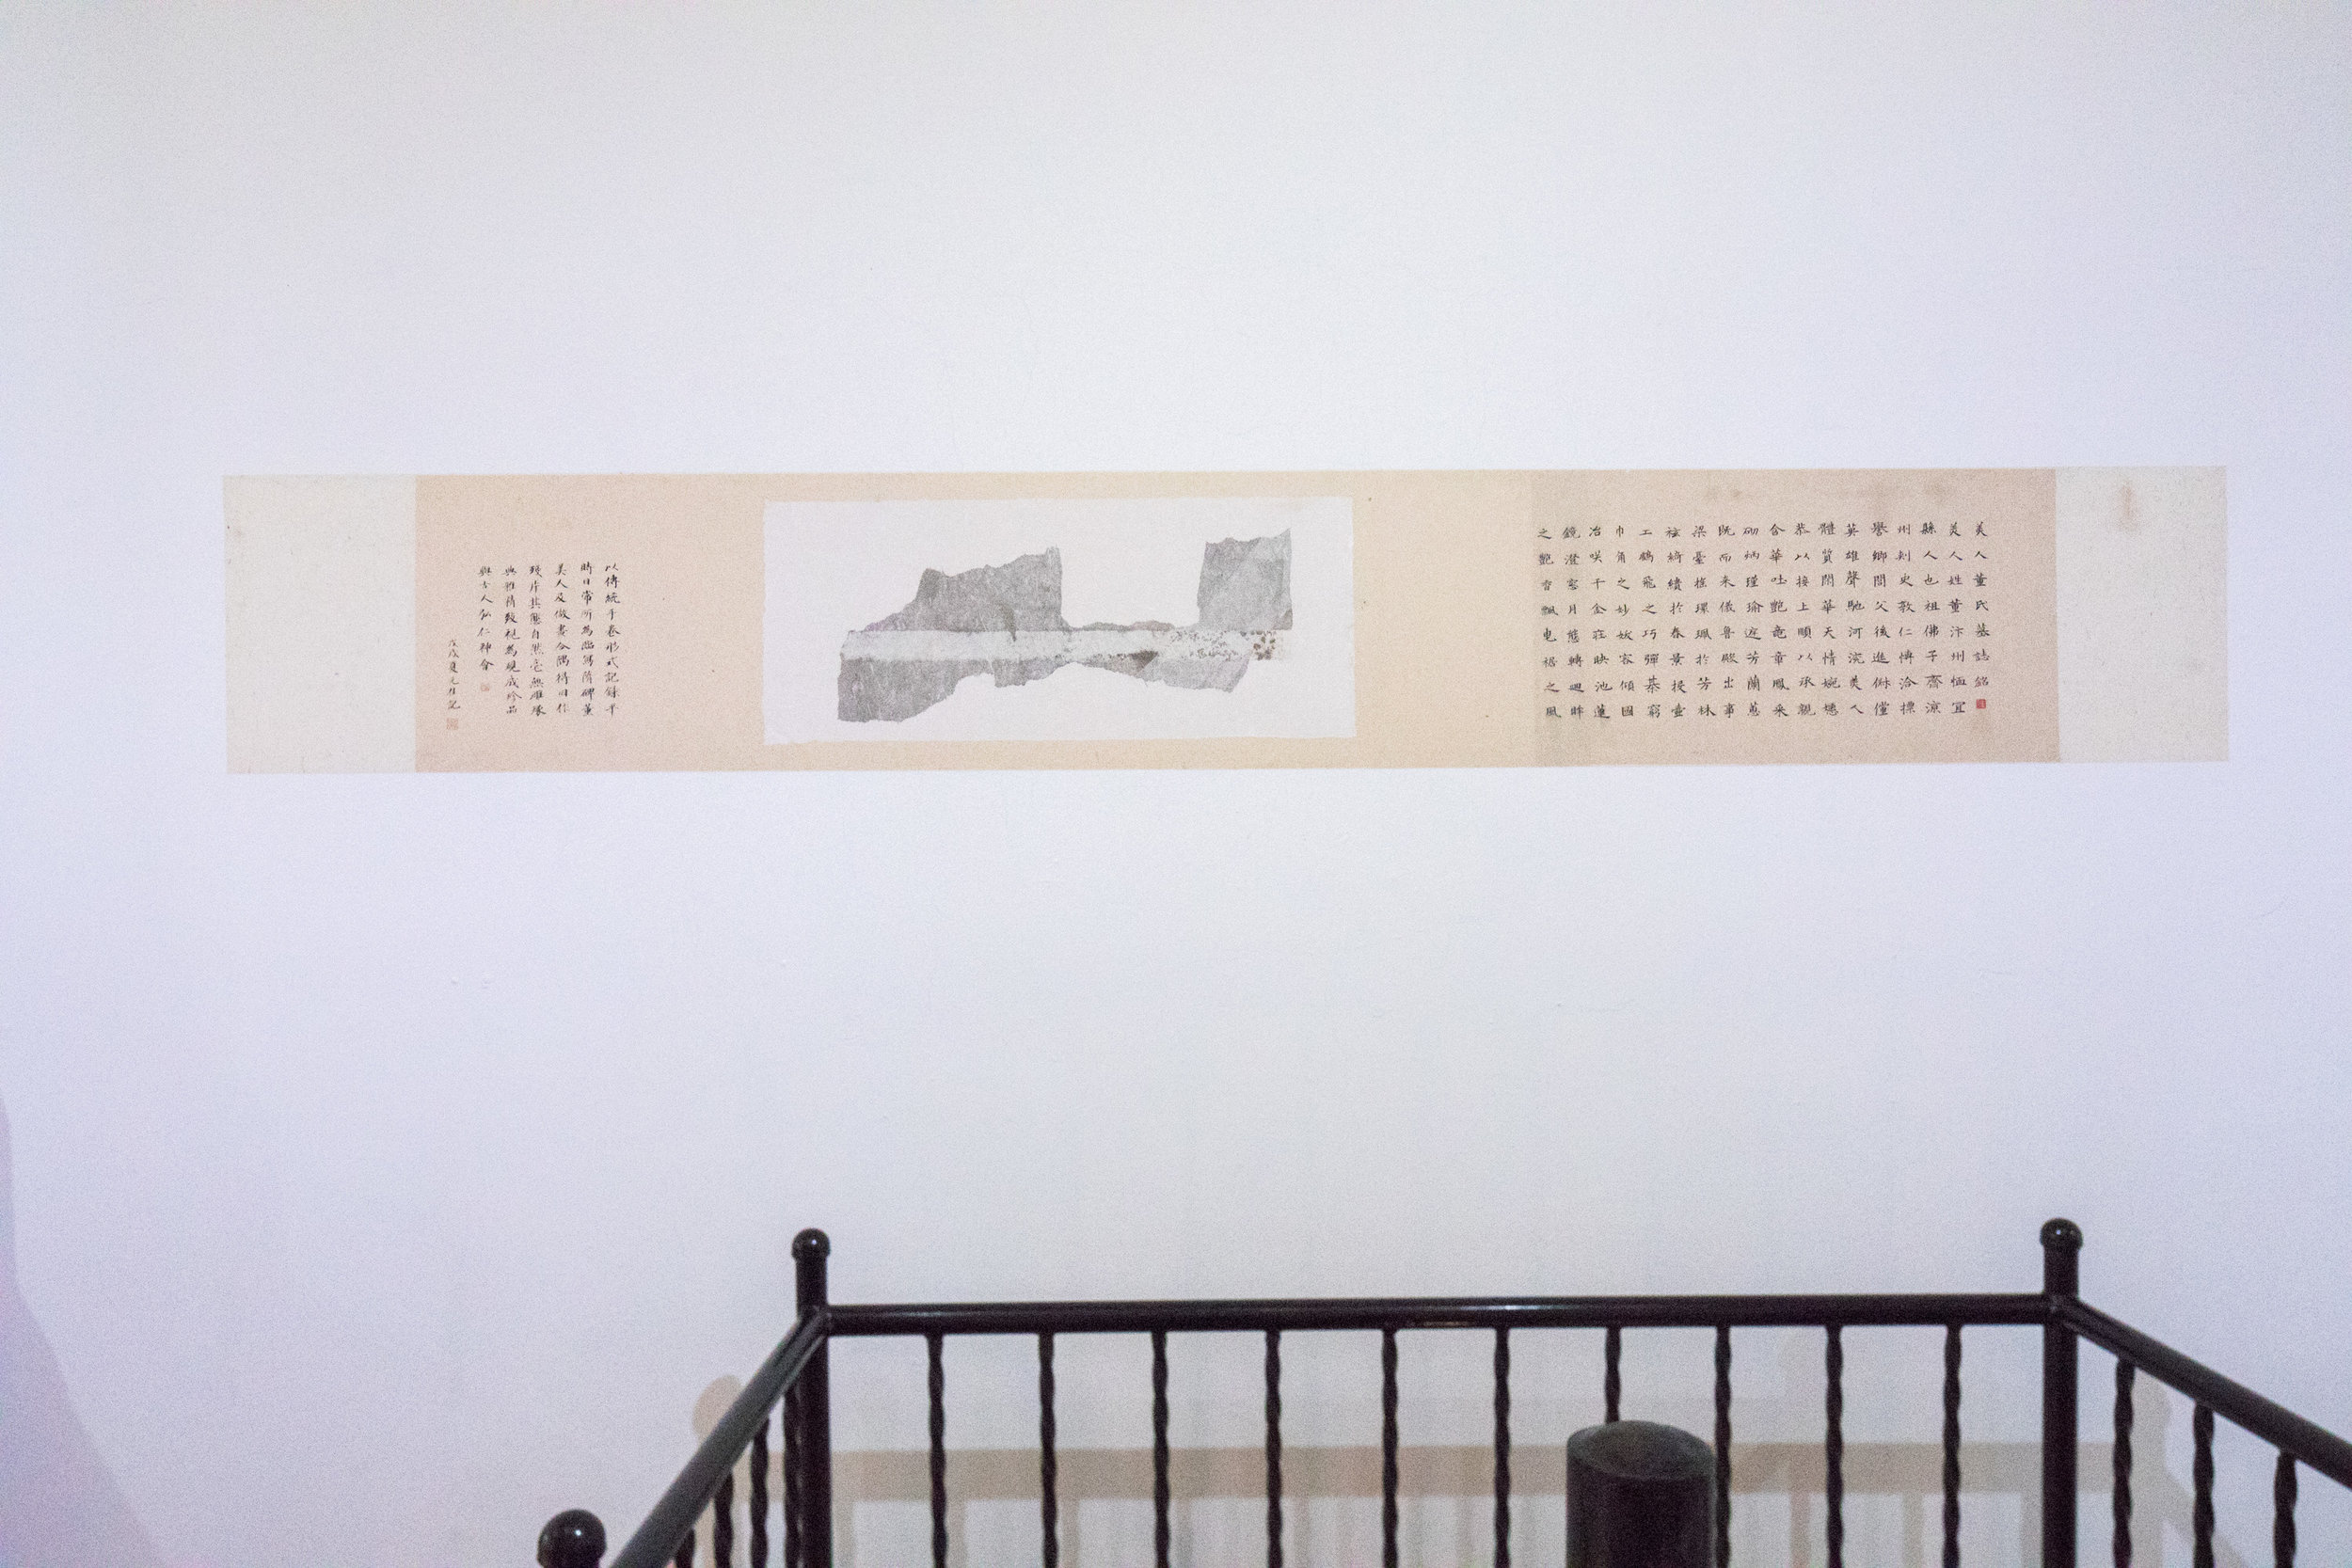   Wei Jia: A Way of Life  installation view, photograph by Nadia Peichao Lin ©Wei Jia, courtesy Fou Gallery 